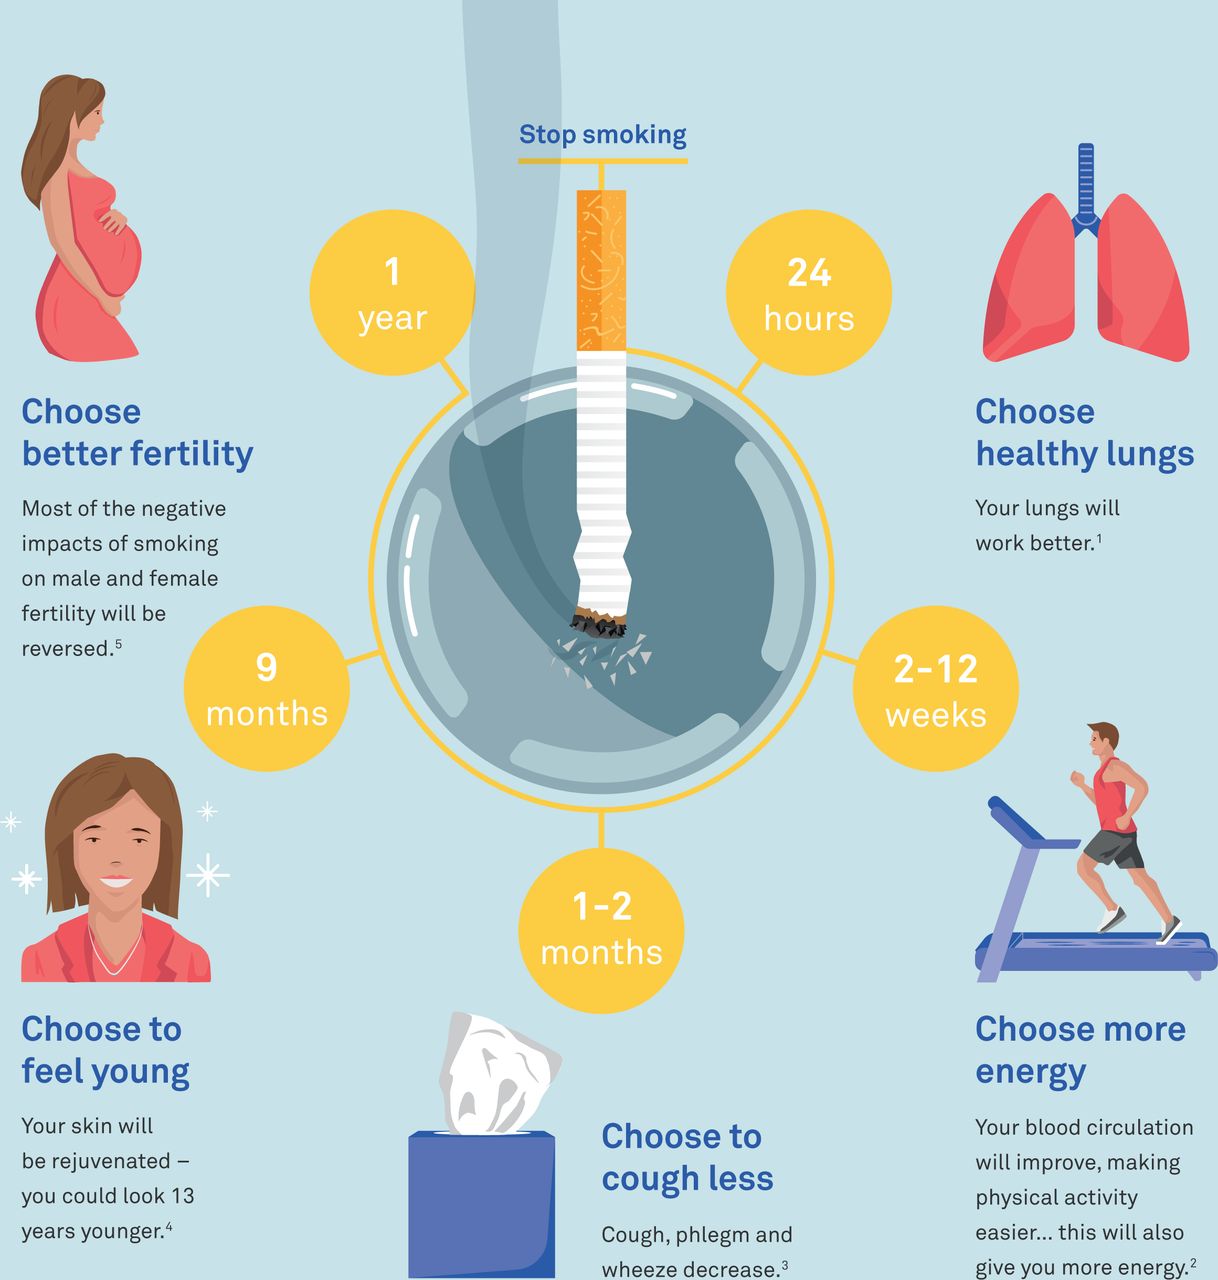 Quitting smoking improves health and saves money